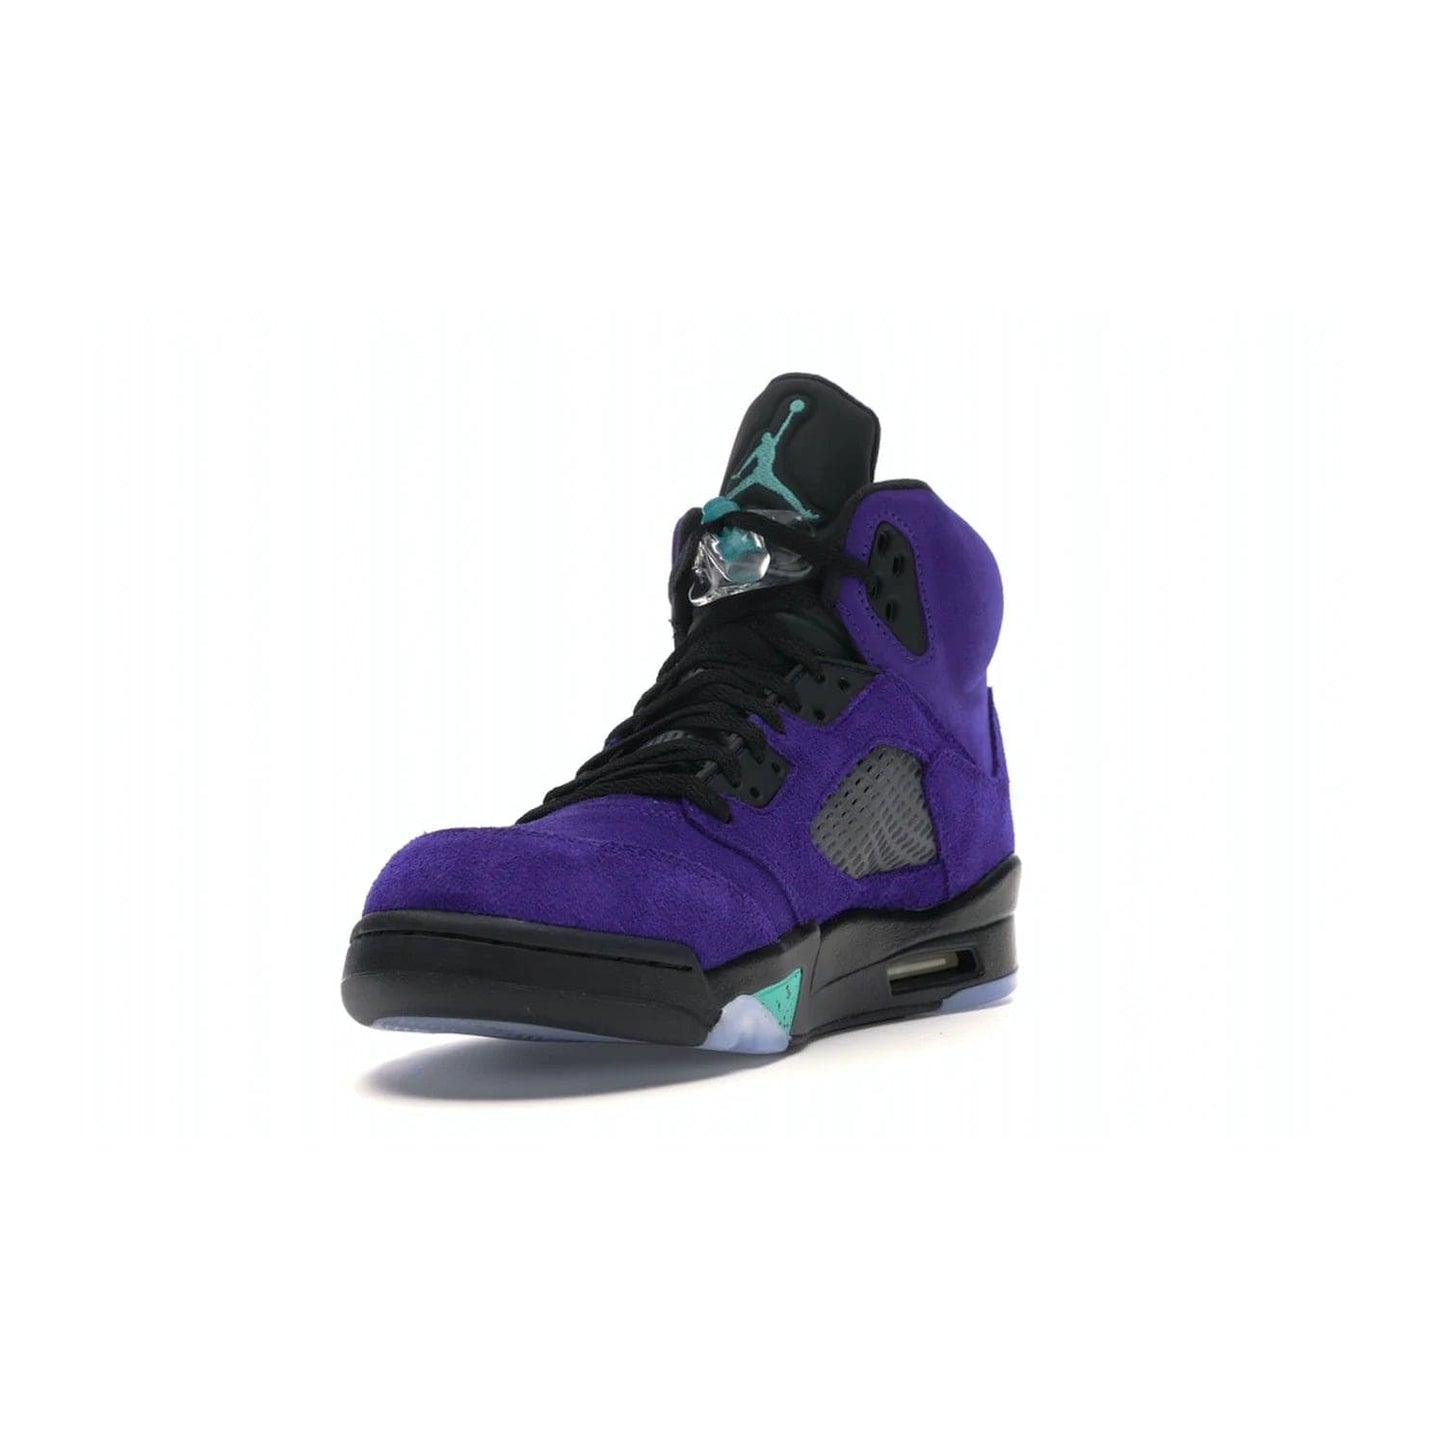 Jordan 5 Retro Alternate Grape - Image 13 - Only at www.BallersClubKickz.com - Bring the classic Jordan 5 Retro Alternate Grape to your sneaker collection! Featuring a purple suede upper, charcoal underlays, green detailing, and an icy and green outsole. Releasing for the first time since 1990, don't miss this chance to add a piece of sneaker history to your collection.